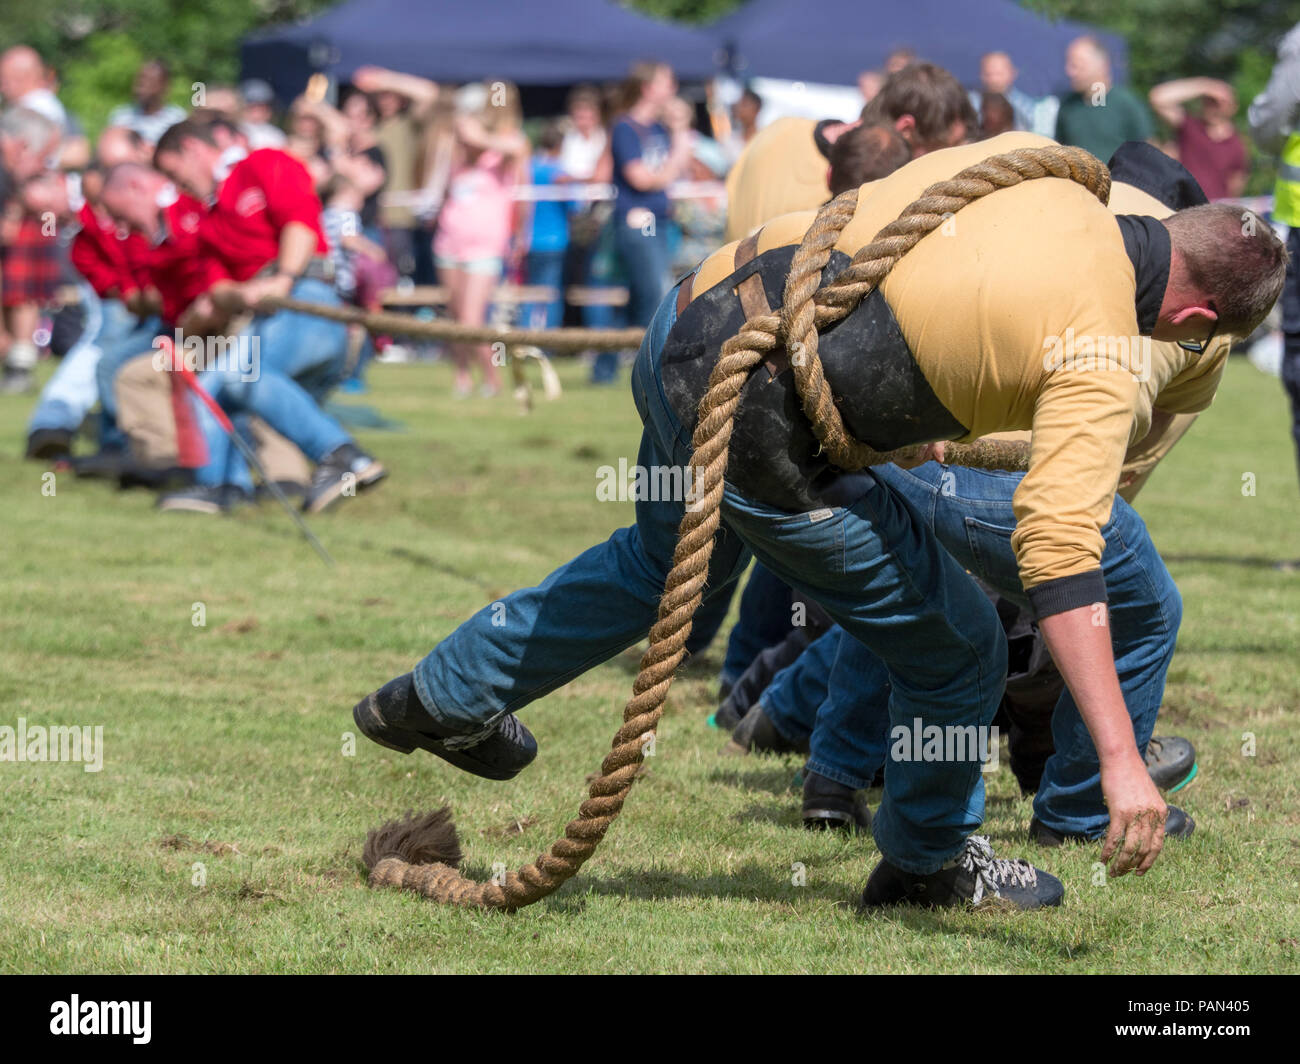 Tomintoul, Scotland - 21 July, 2018: Tug of War event at the Highland Games in Tomintoul, Scotland. Stock Photo